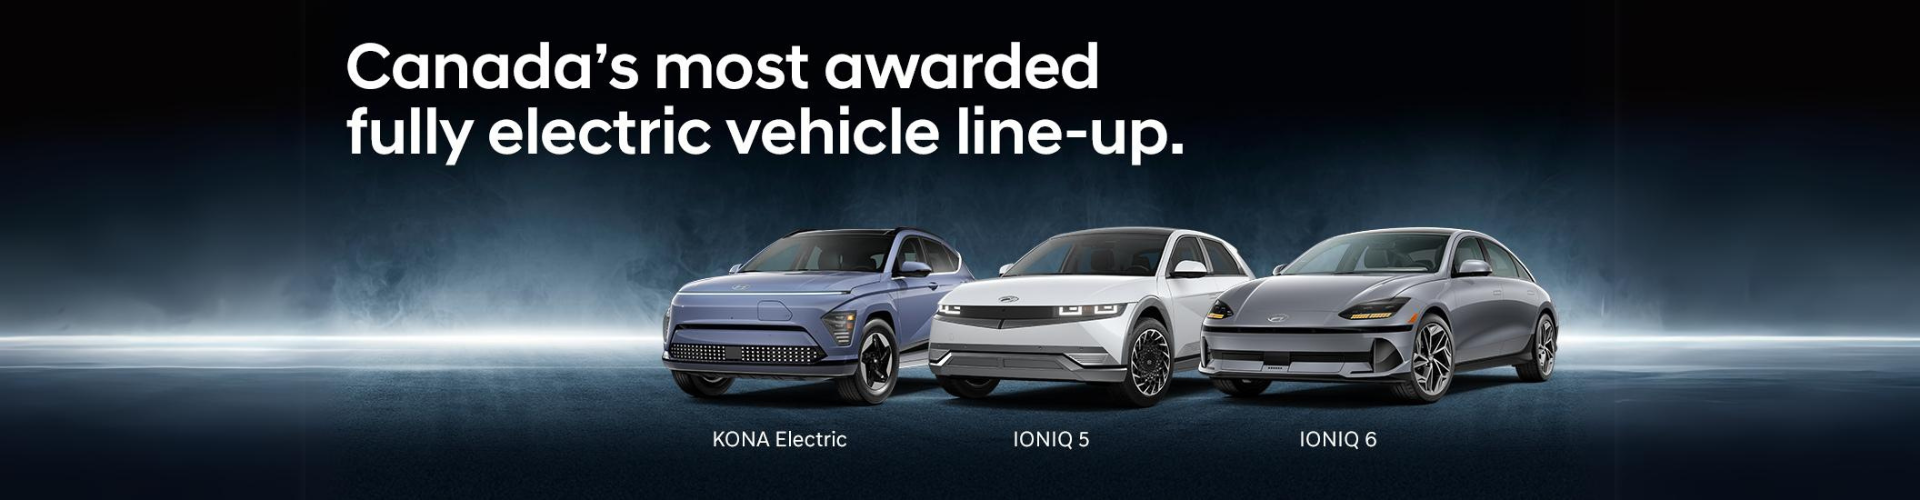 Canada's Most Awarded EV Lineup